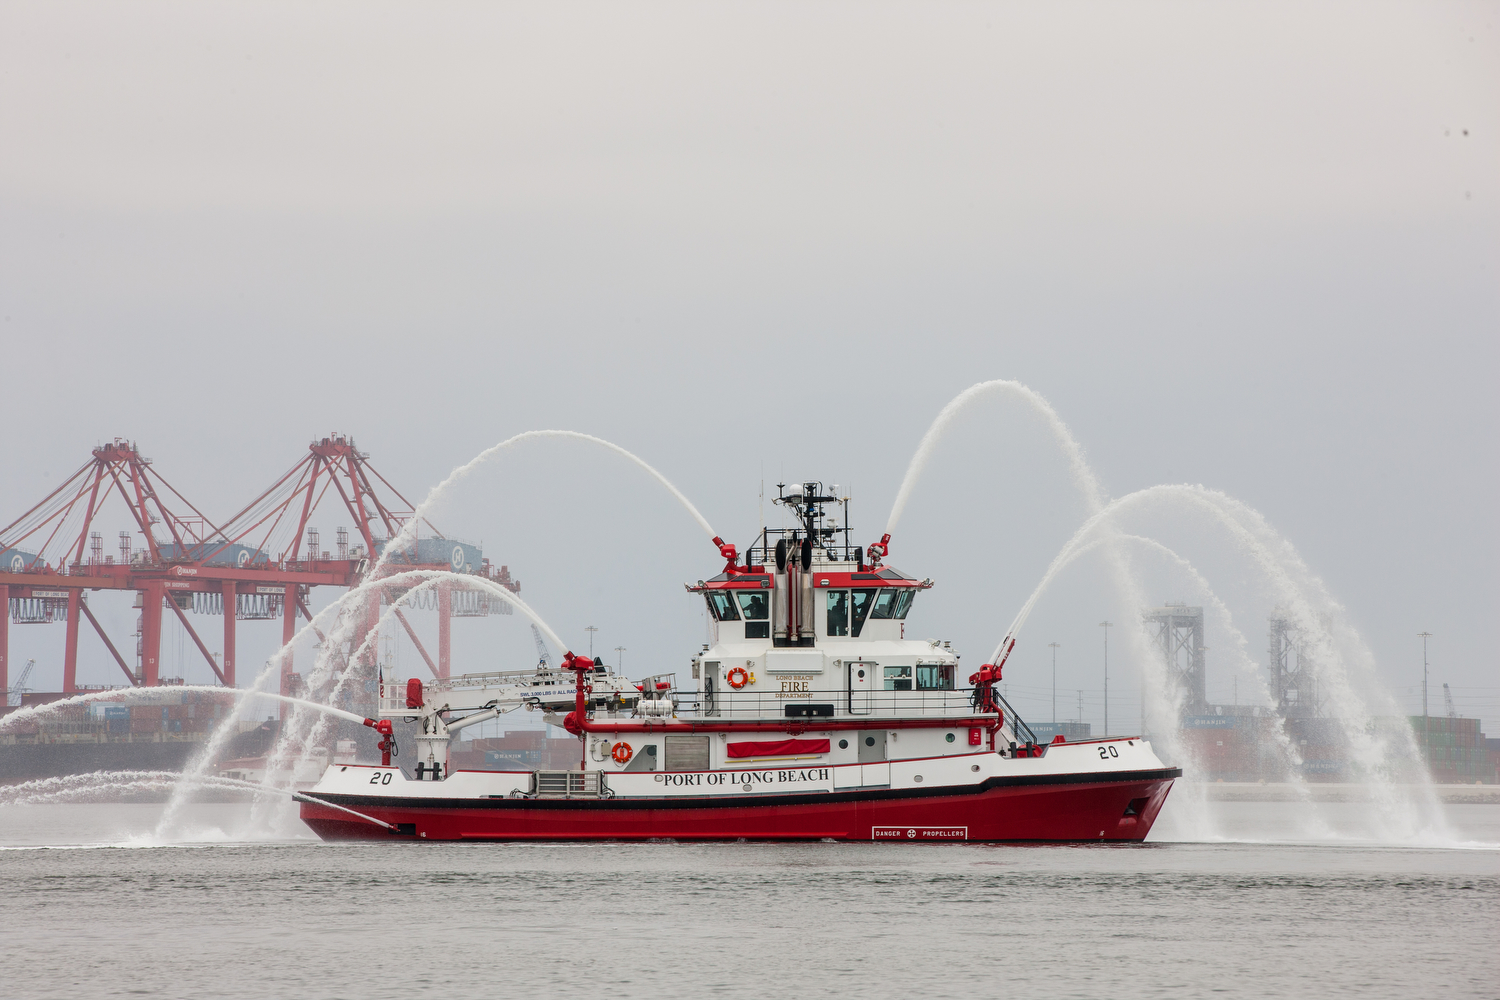 Protector, a new state-of-the-art fireboat, goes into service at the Port in June 2016. Protector is equipped with 10 water cannons capable of extinguishing fires in the harbor or on nearby land with more than 41,000 gallons per minute. A second fireboat, the Vigilance, is delivered in 2017.